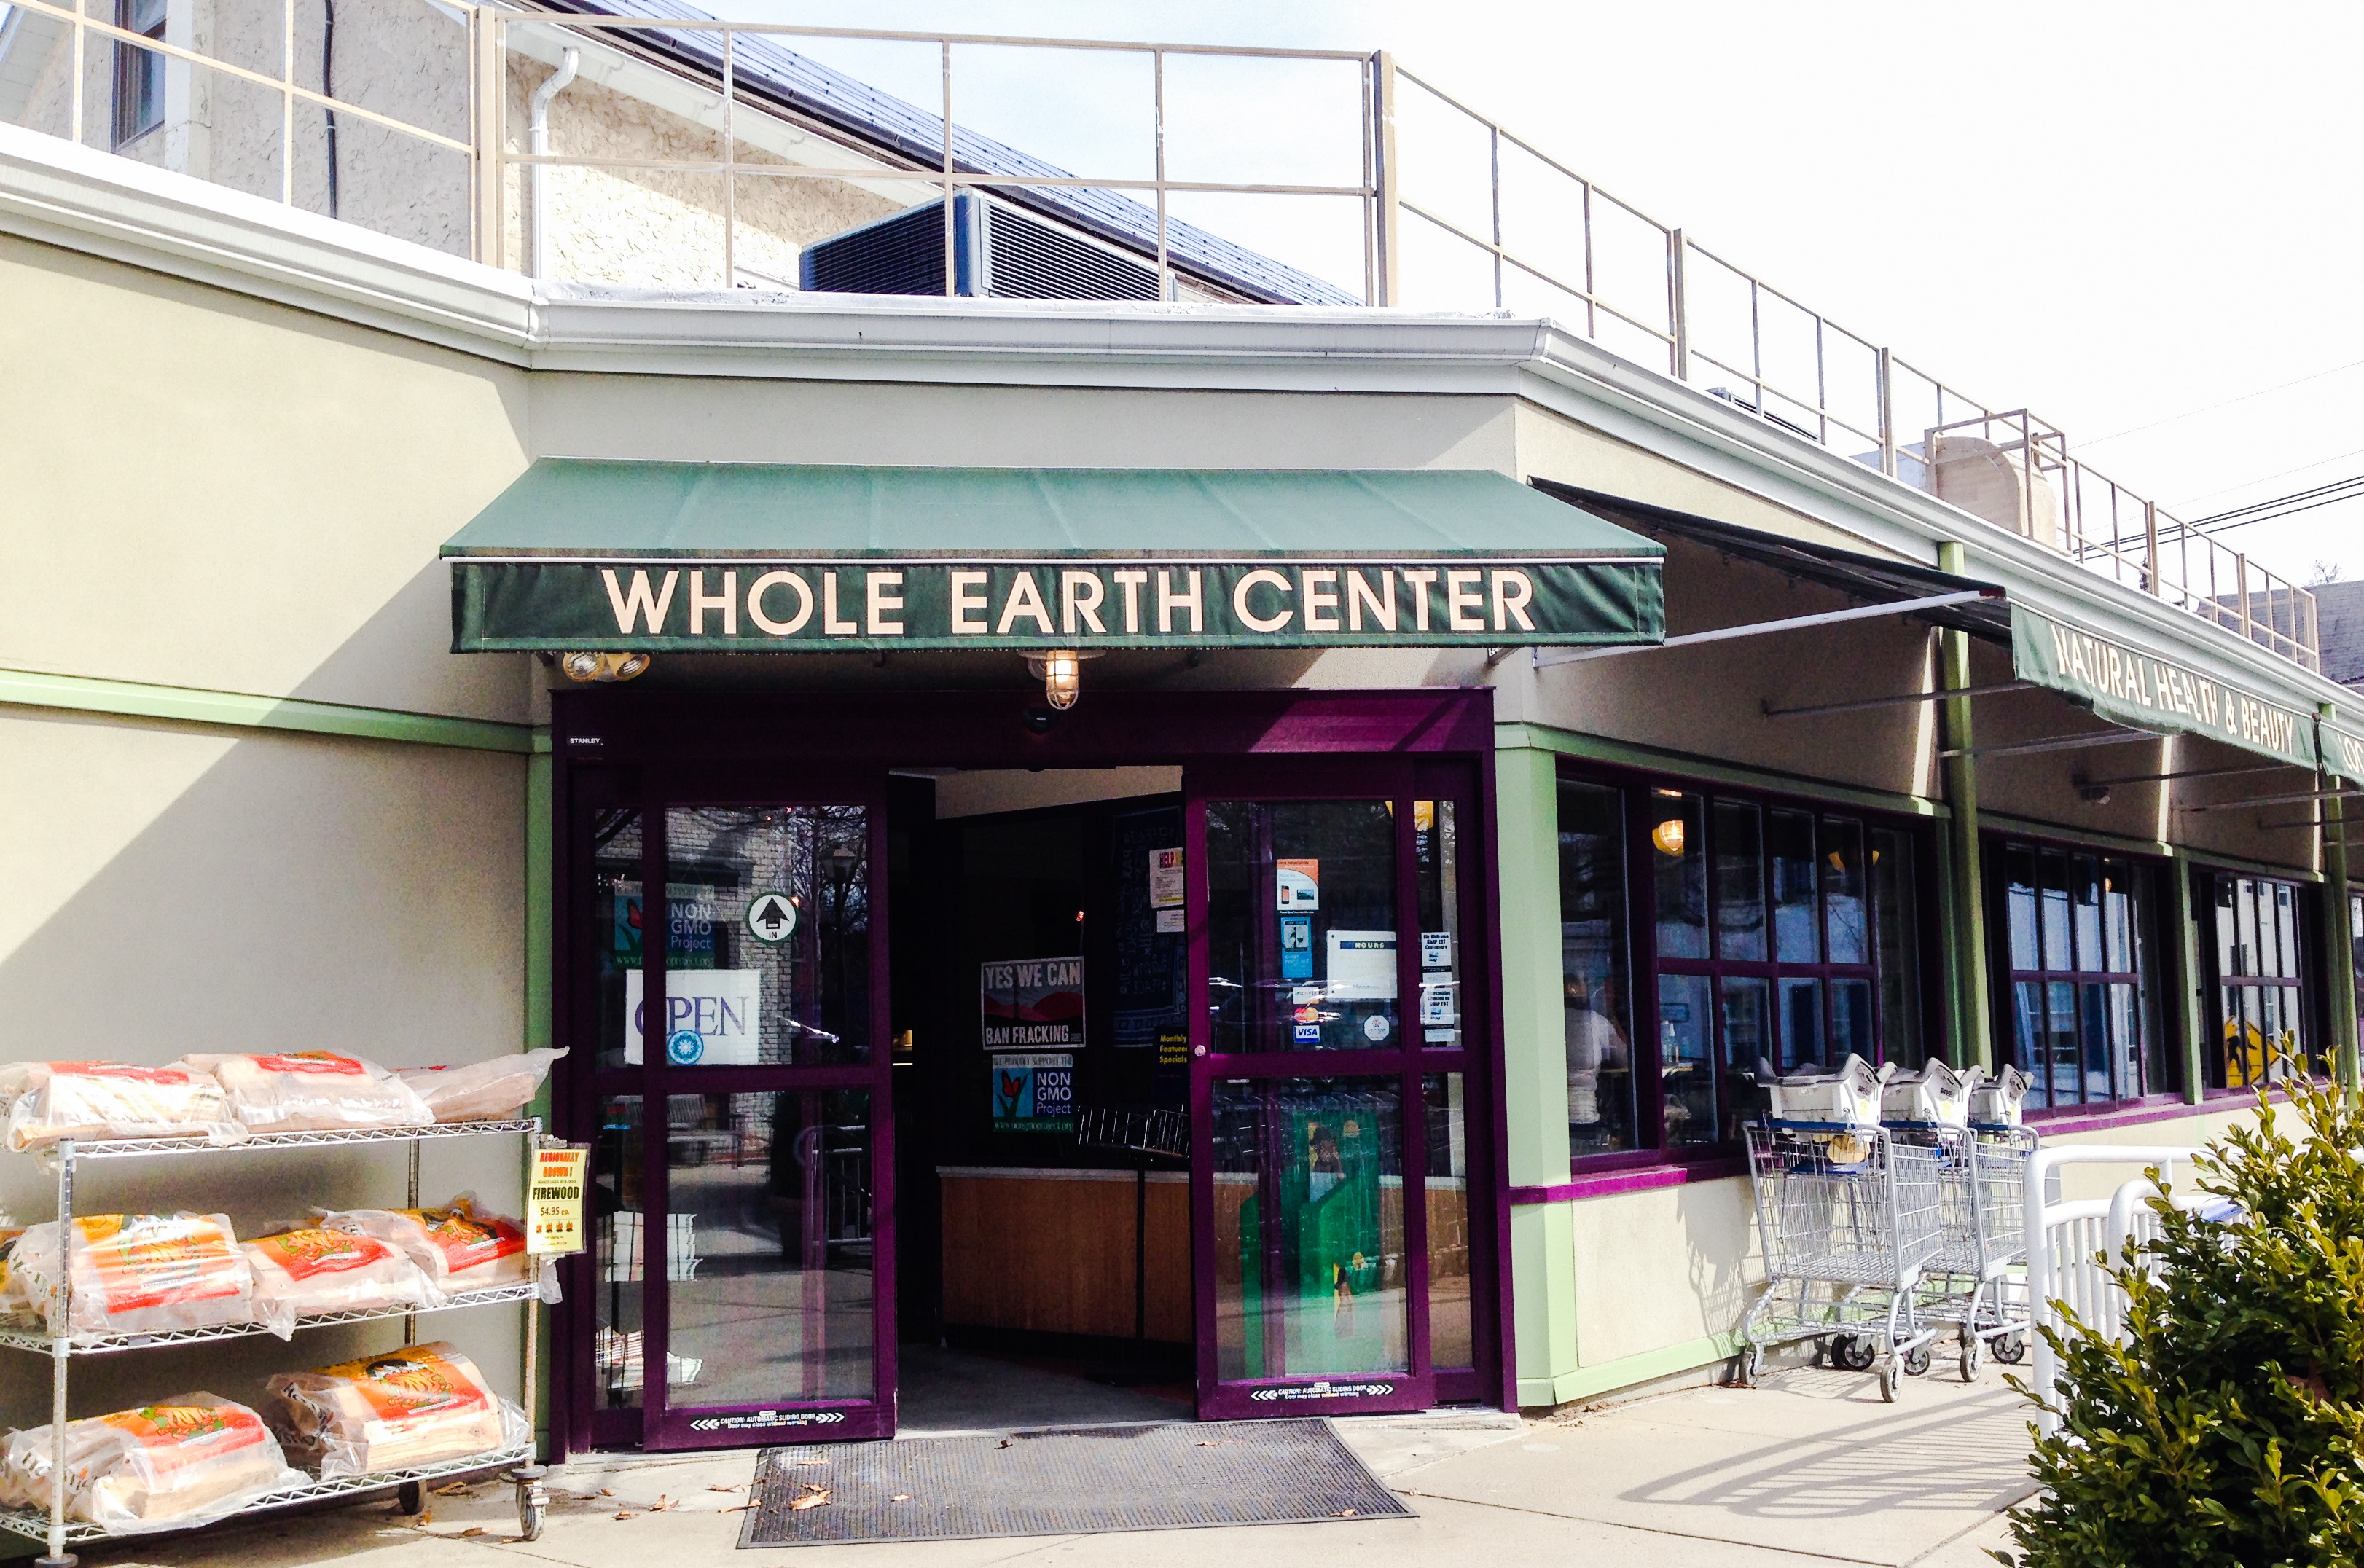 This is a picture of the Whole Earth Center.